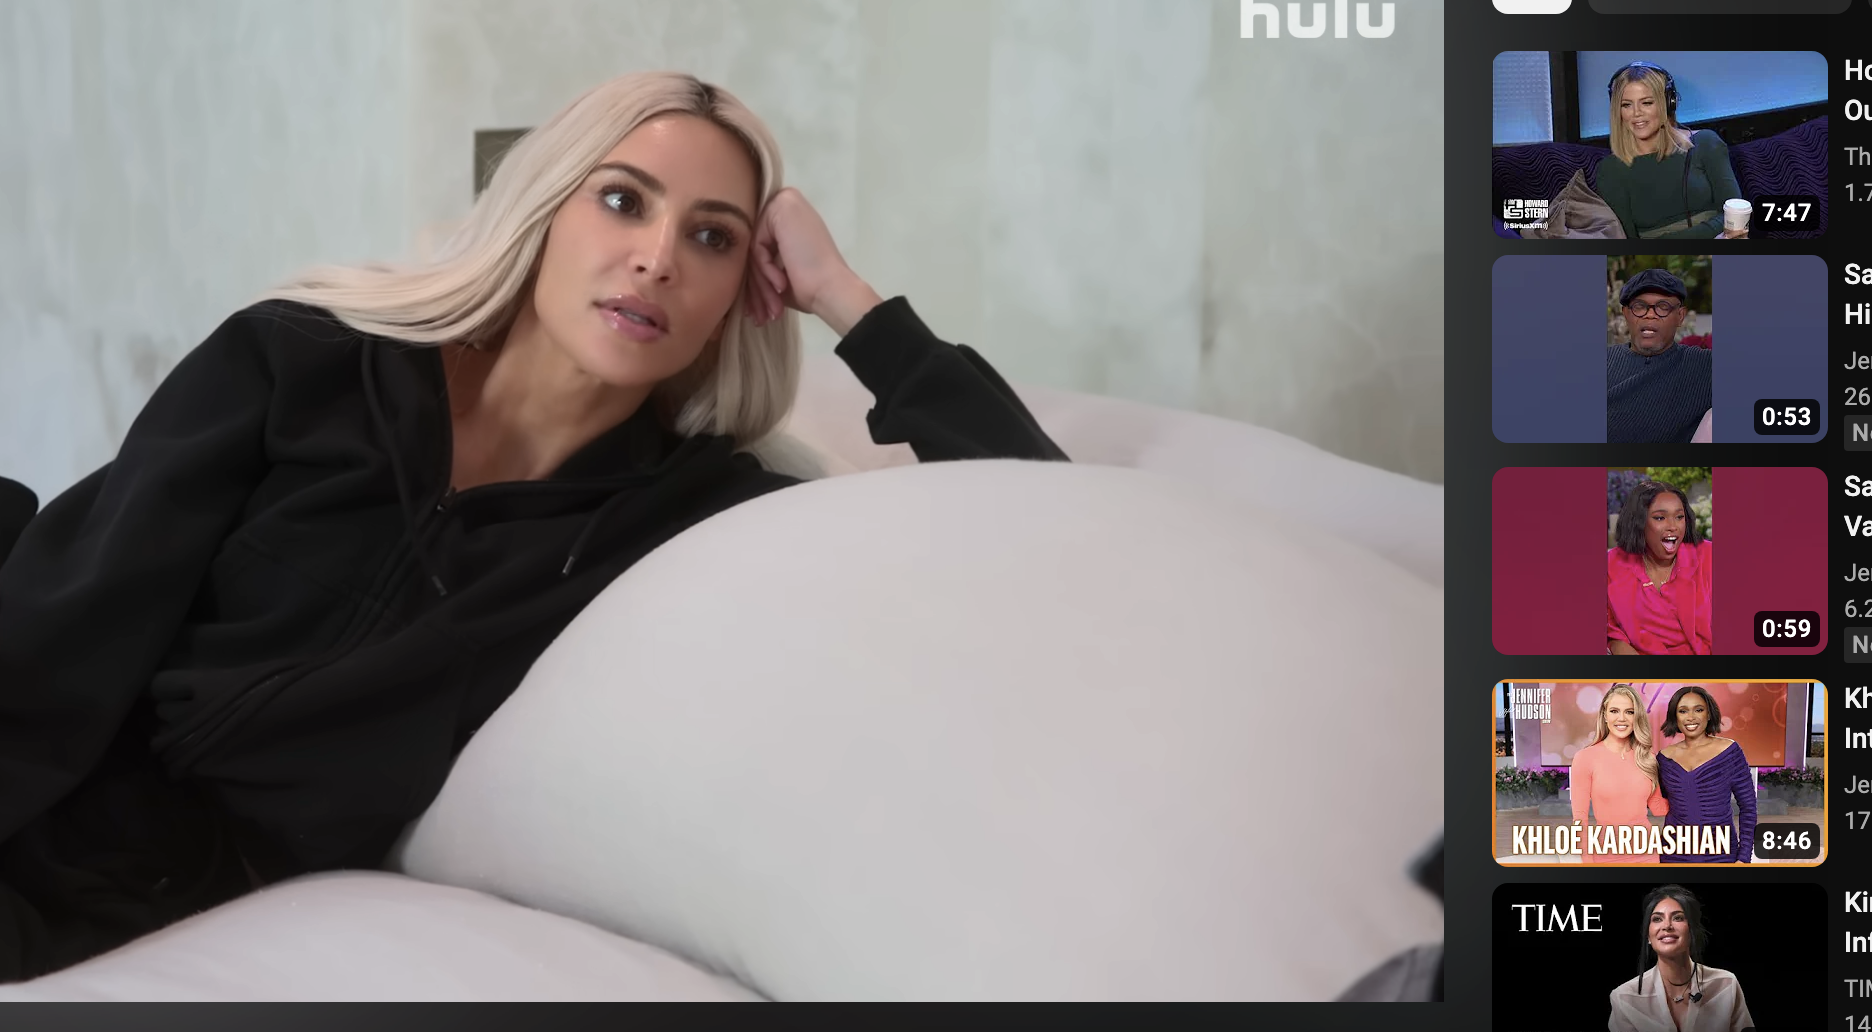 Kim leaning on couch pillows